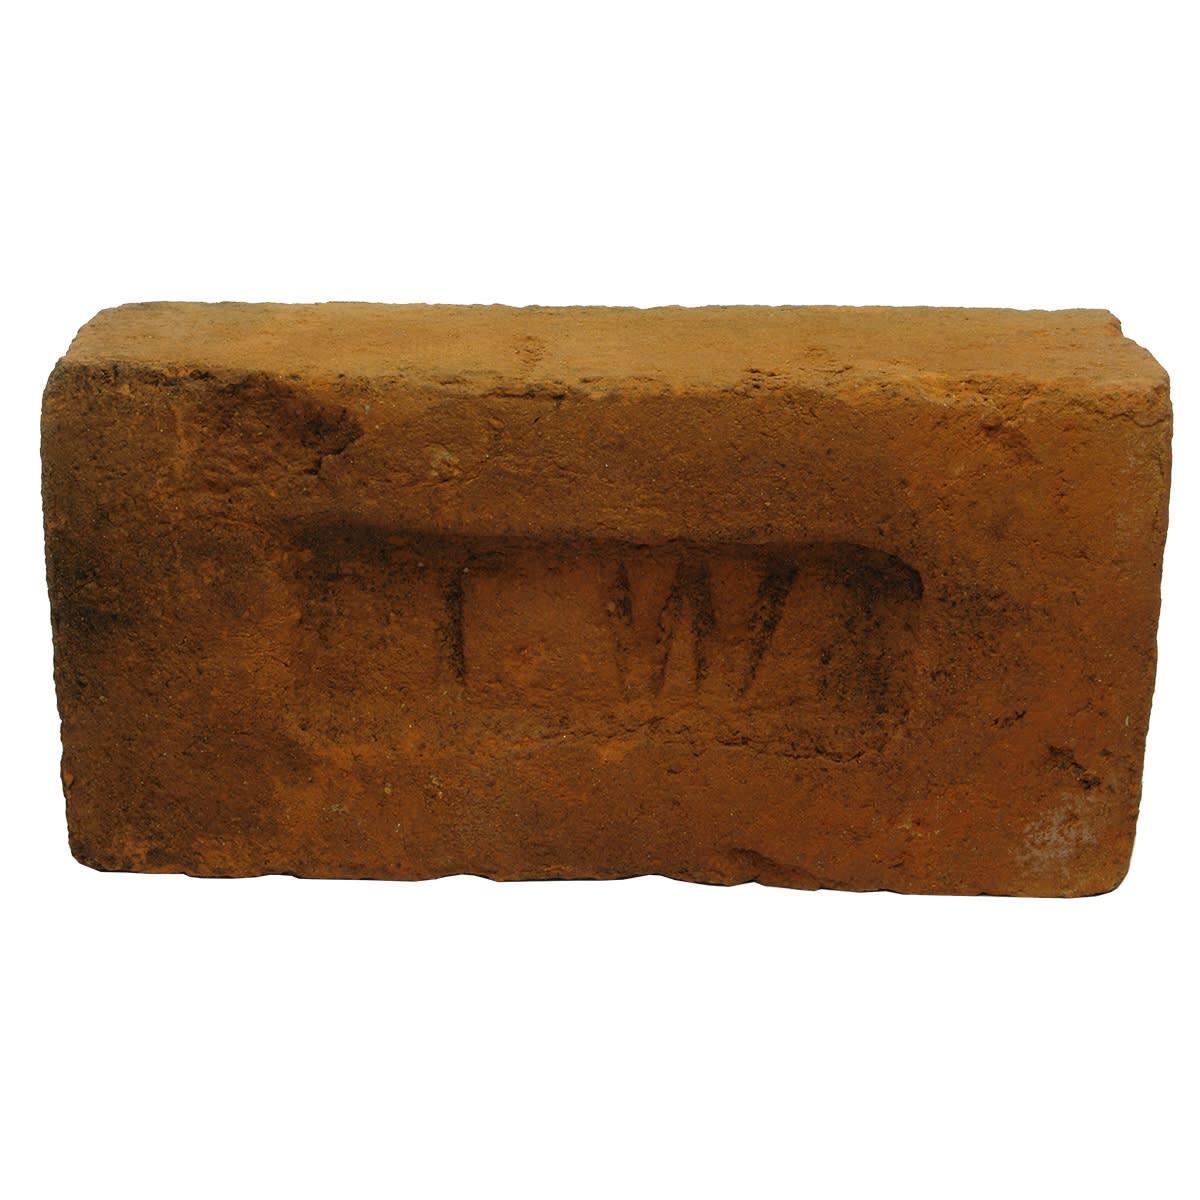 Brick. T W in a rectangle impressed. Sandstock type.